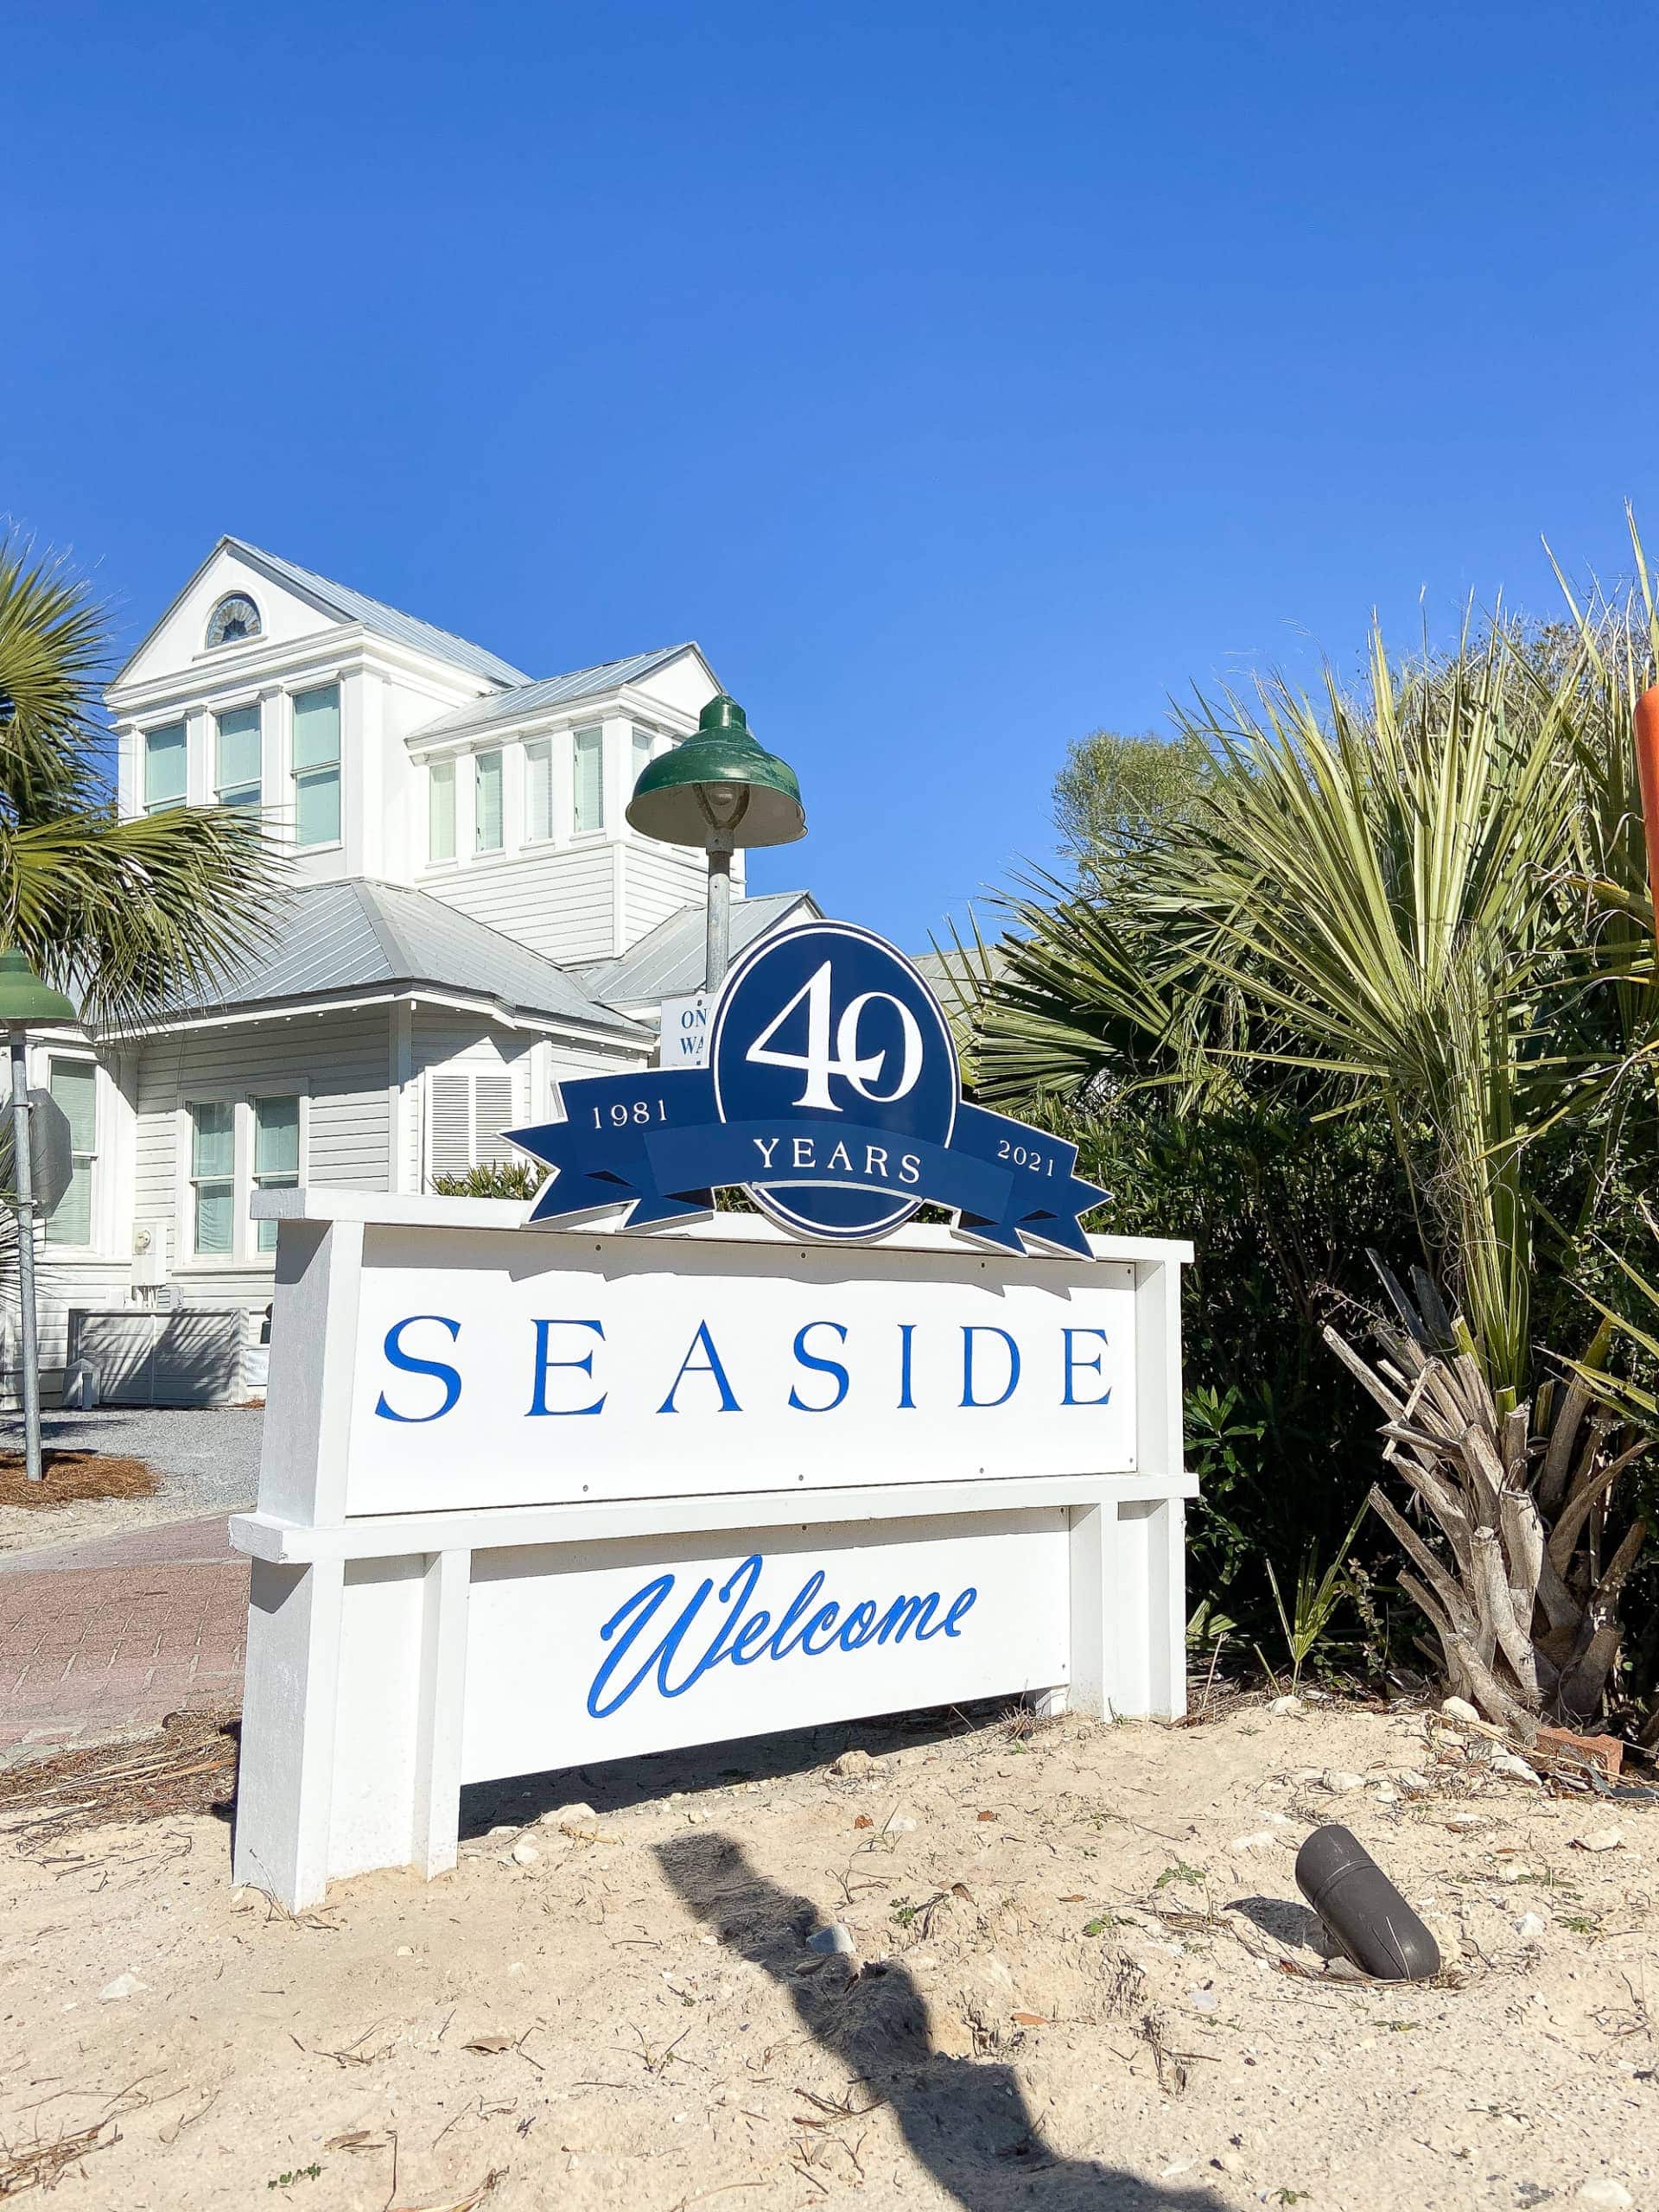 Our visit to seaside florida